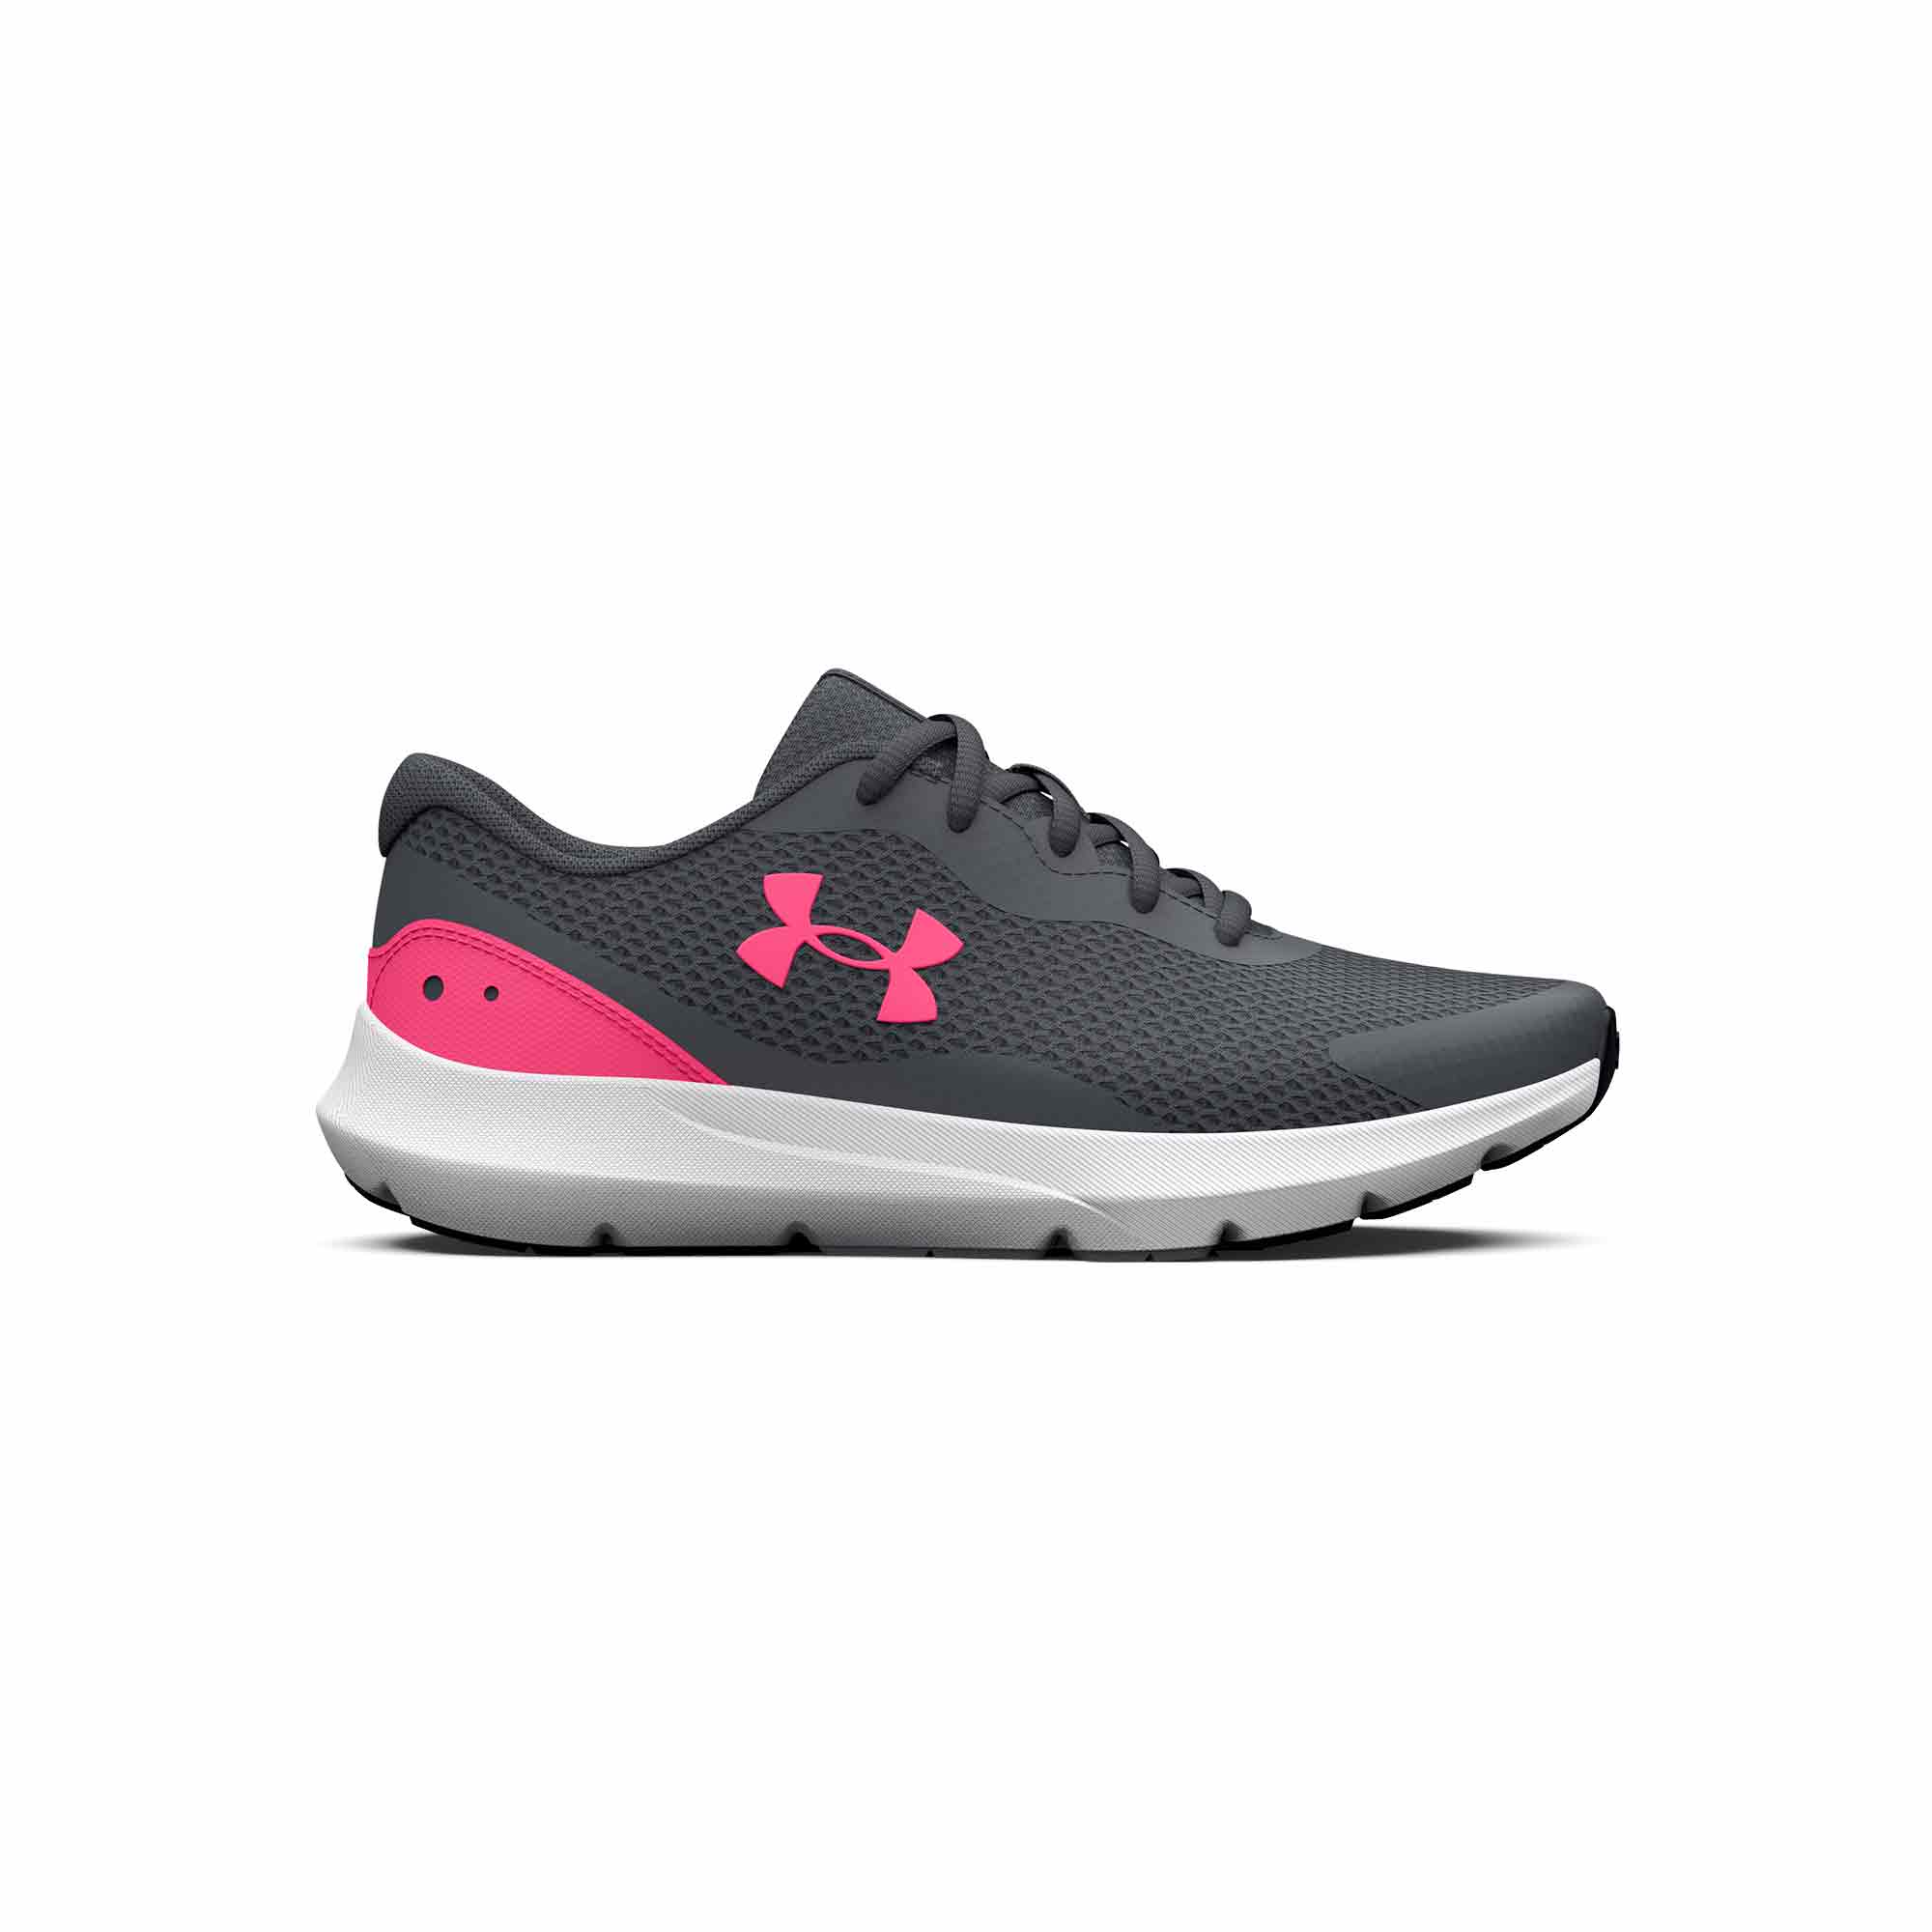 Under Armour Kids GS Surge 3 Running Shoes